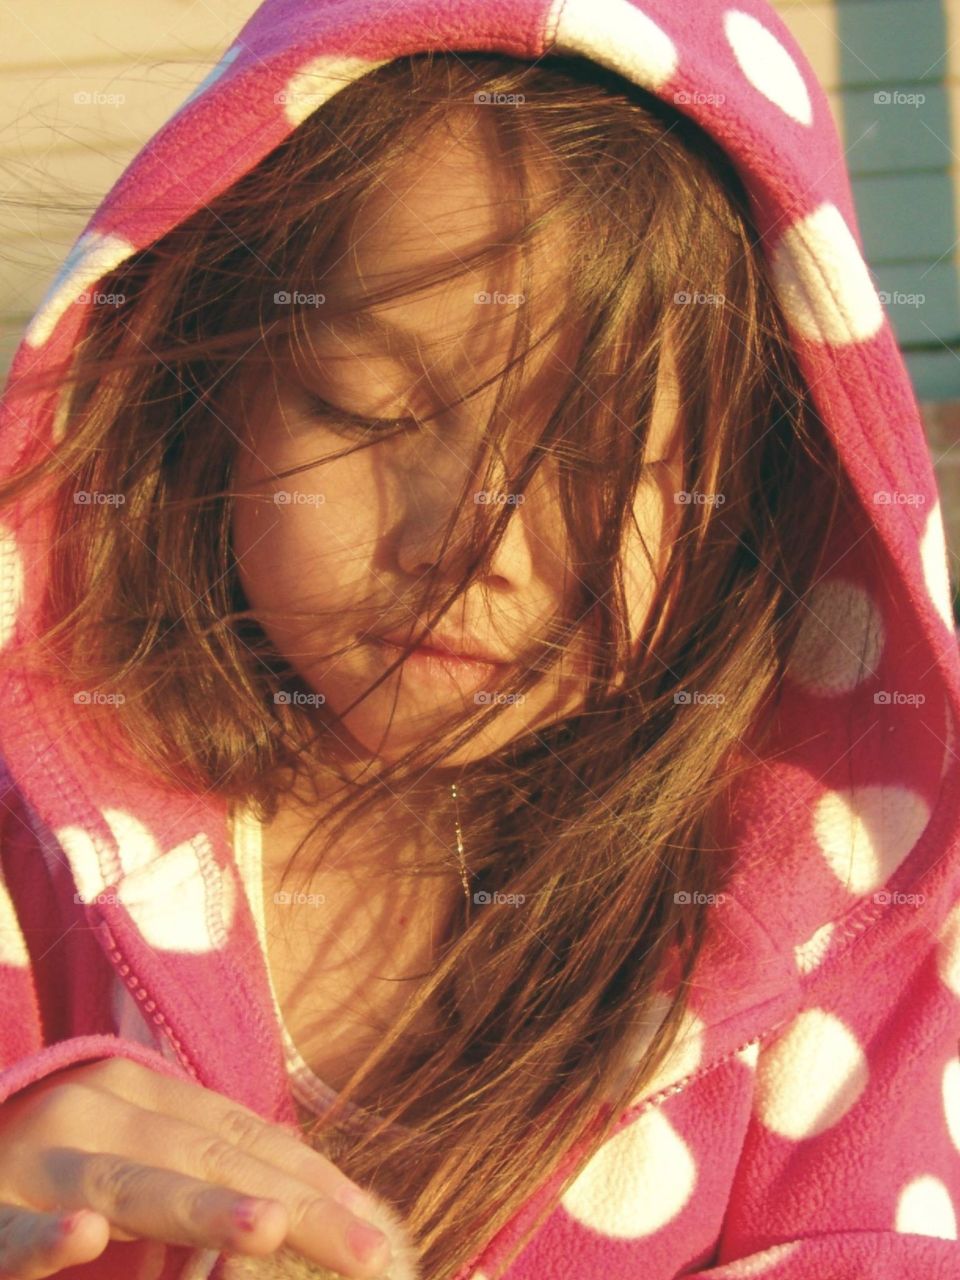 Billie. I took this photo of my niece Billie one afternoon trying to practice some new techniques I had learned for golden hour 